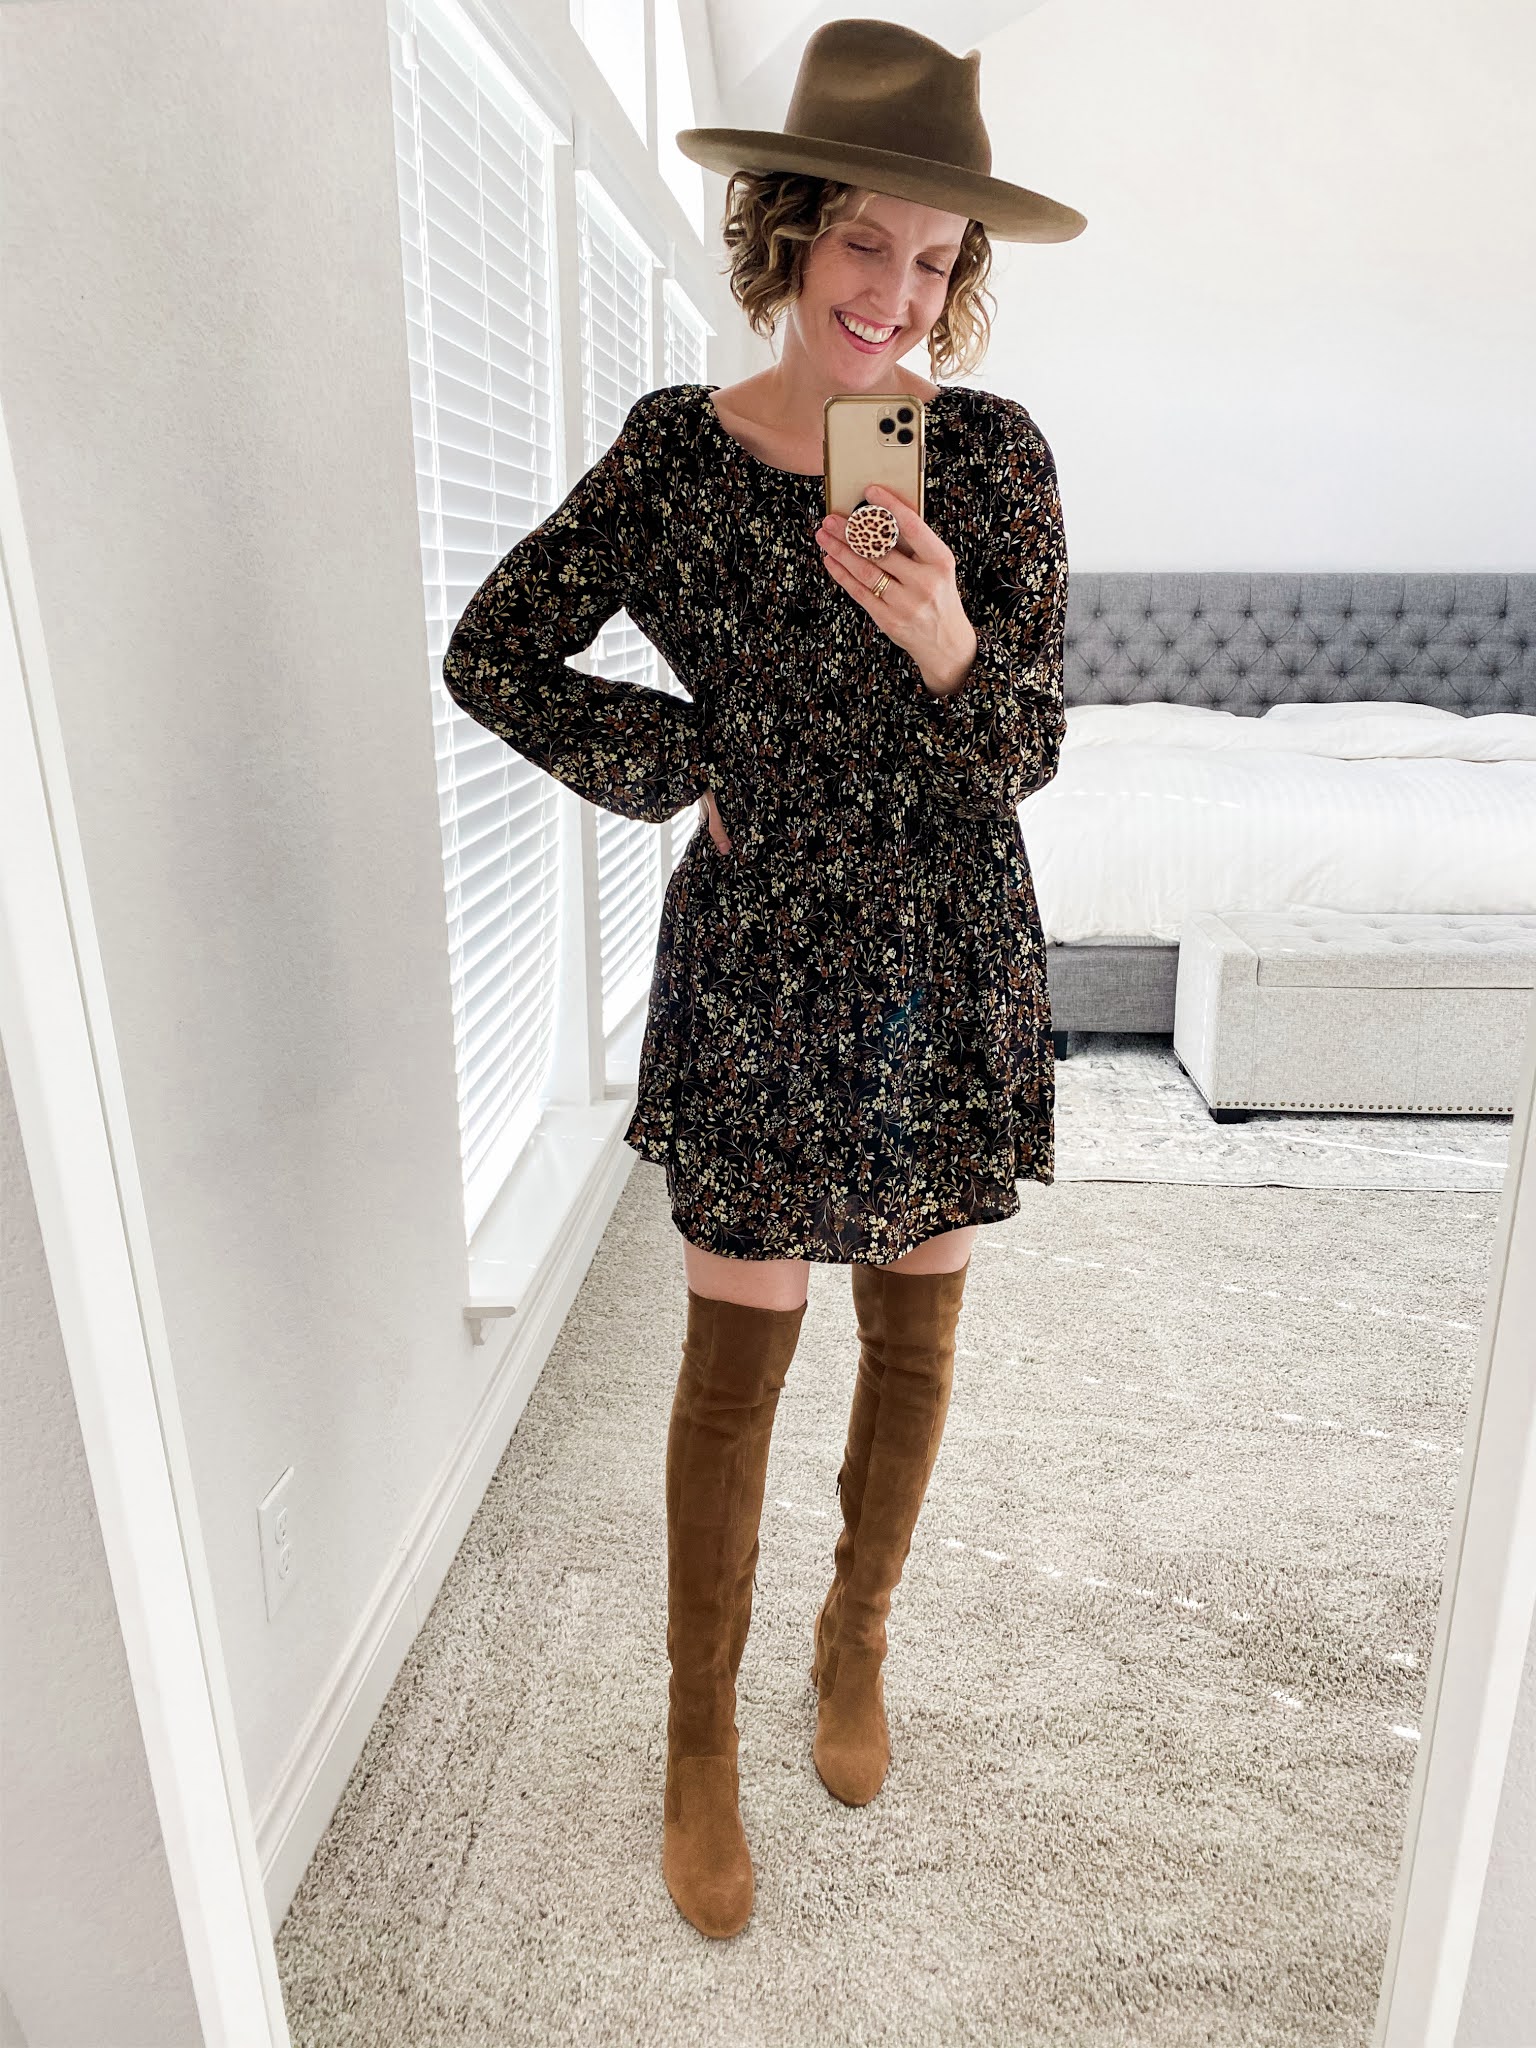 How To Style Over The Knee Boots